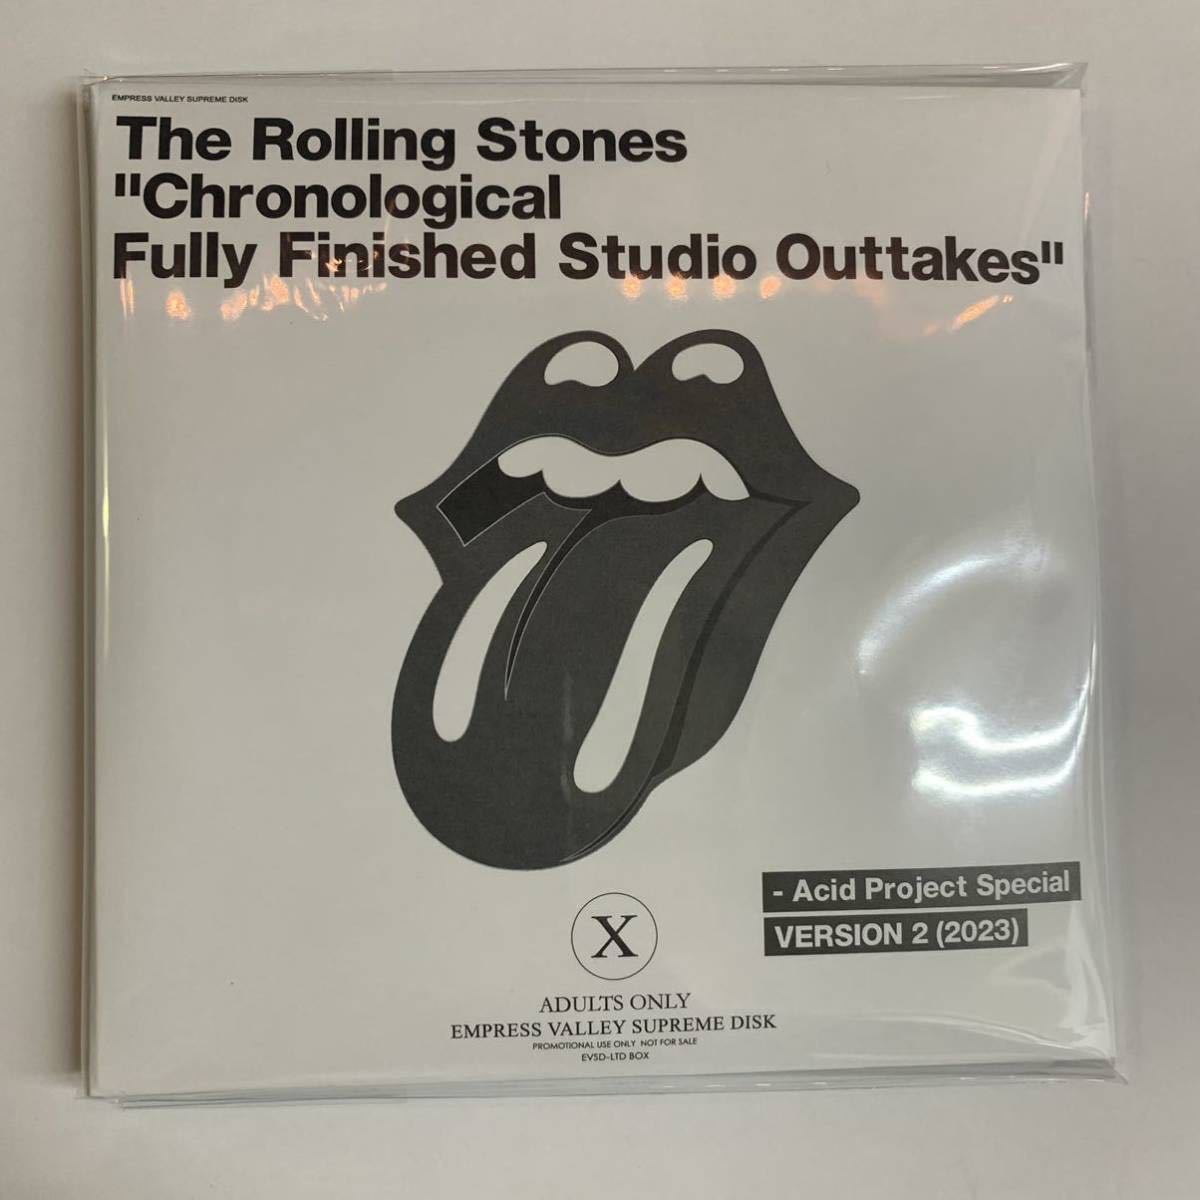 THE ROLLING STONES / Chronological Fully Finished Studio Outtakes Acid Project Special Version 2 (2023) 4CD 最新バージョン！_画像1